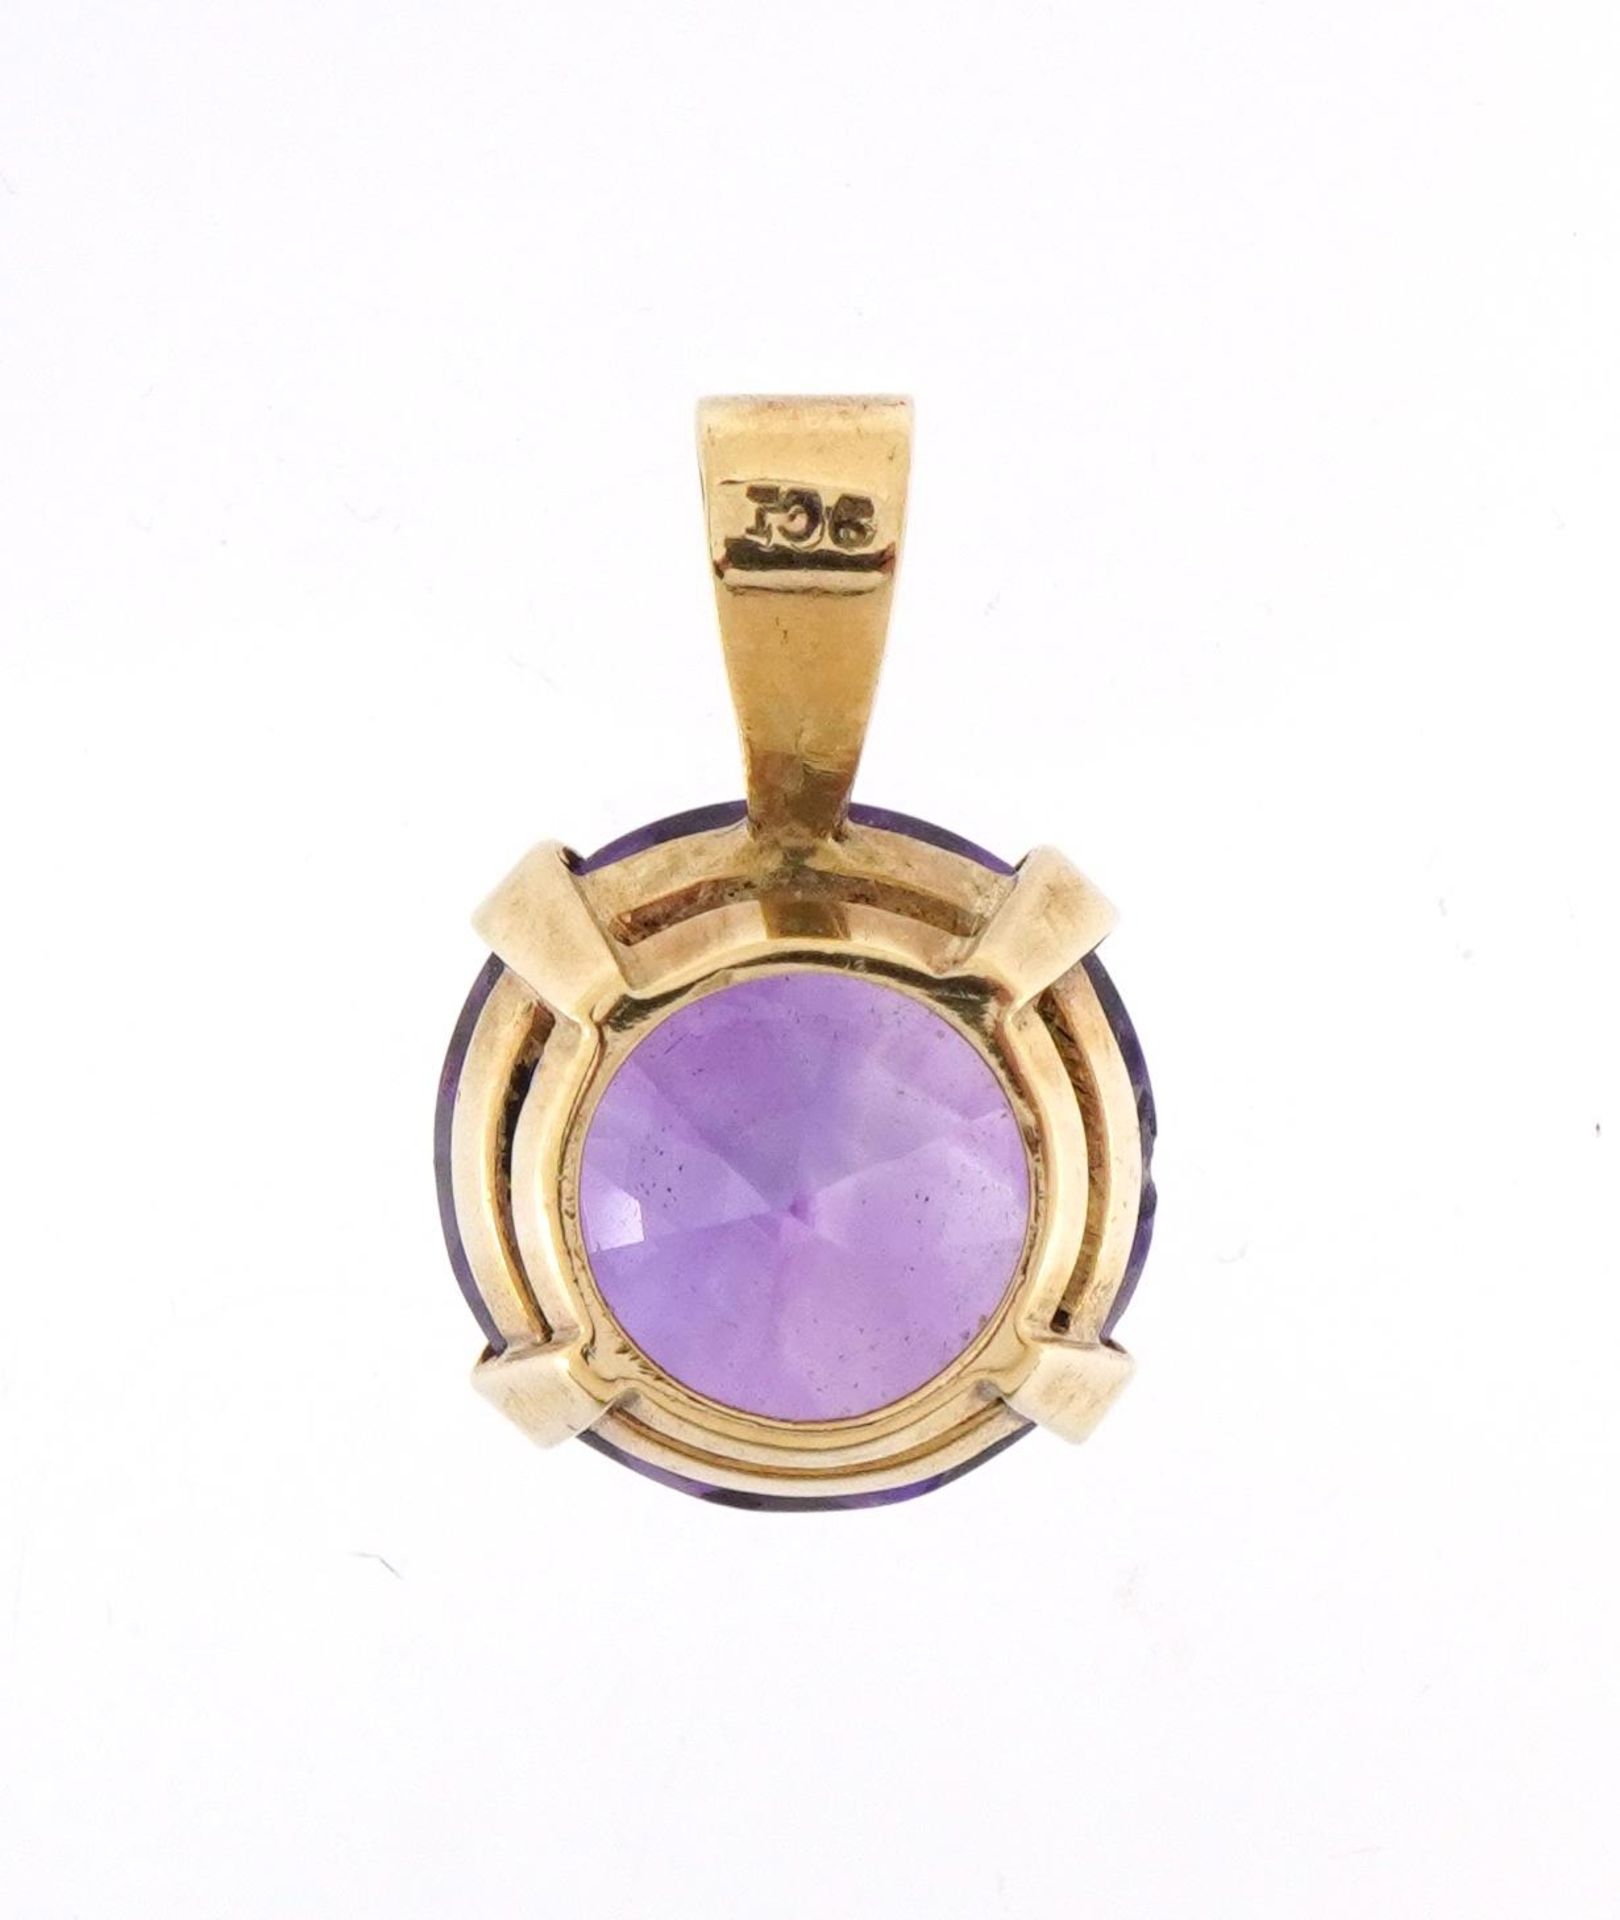 9ct gold purple stone solitaire pendant, possibly amethyst, 1.9cm high, 2.6g - Image 2 of 3